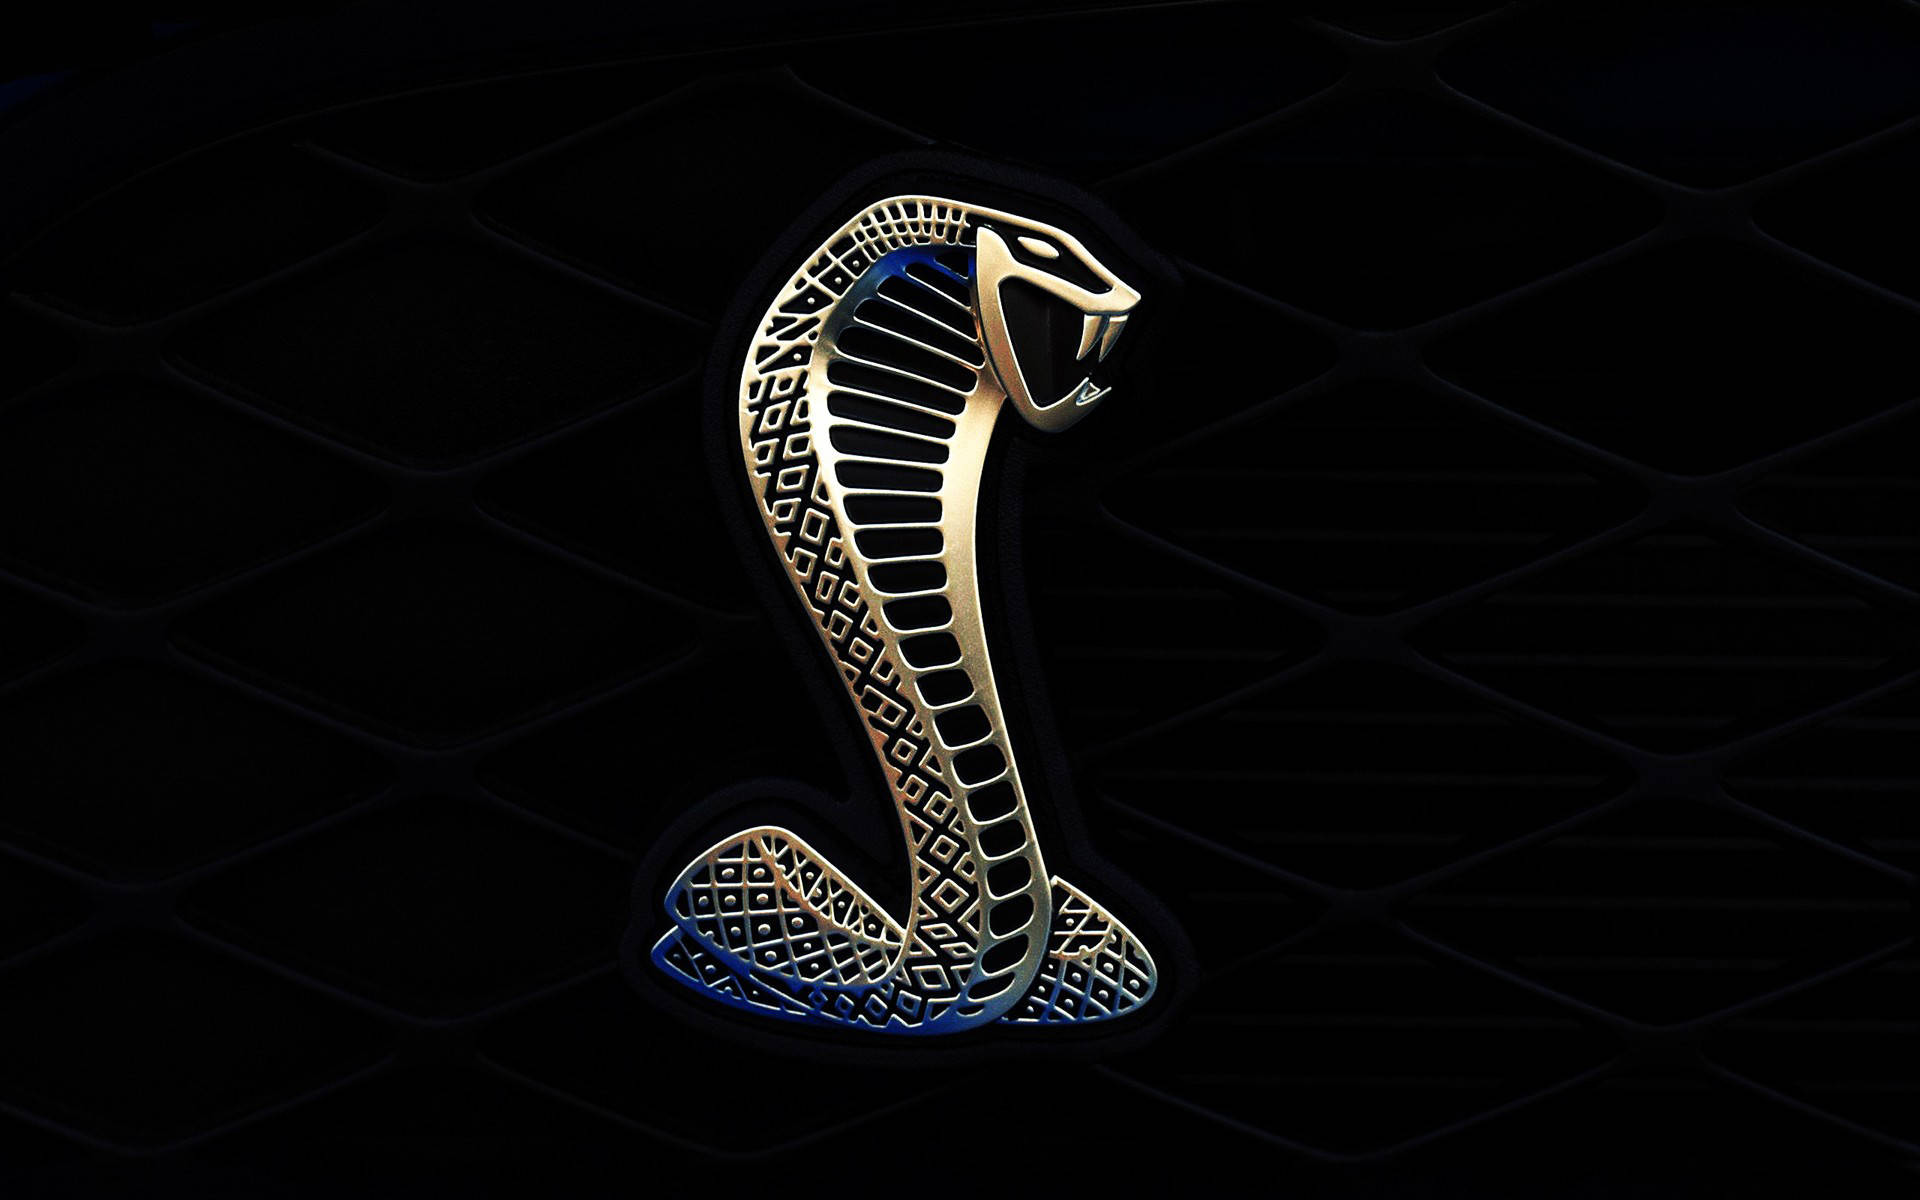 Mustanghd Cobra Logotyp Svart (referring To A Potential Computer Or Mobile Wallpaper Featuring A High Definition Image Of The Black Cobra Logo For The Mustang Car Brand). Wallpaper